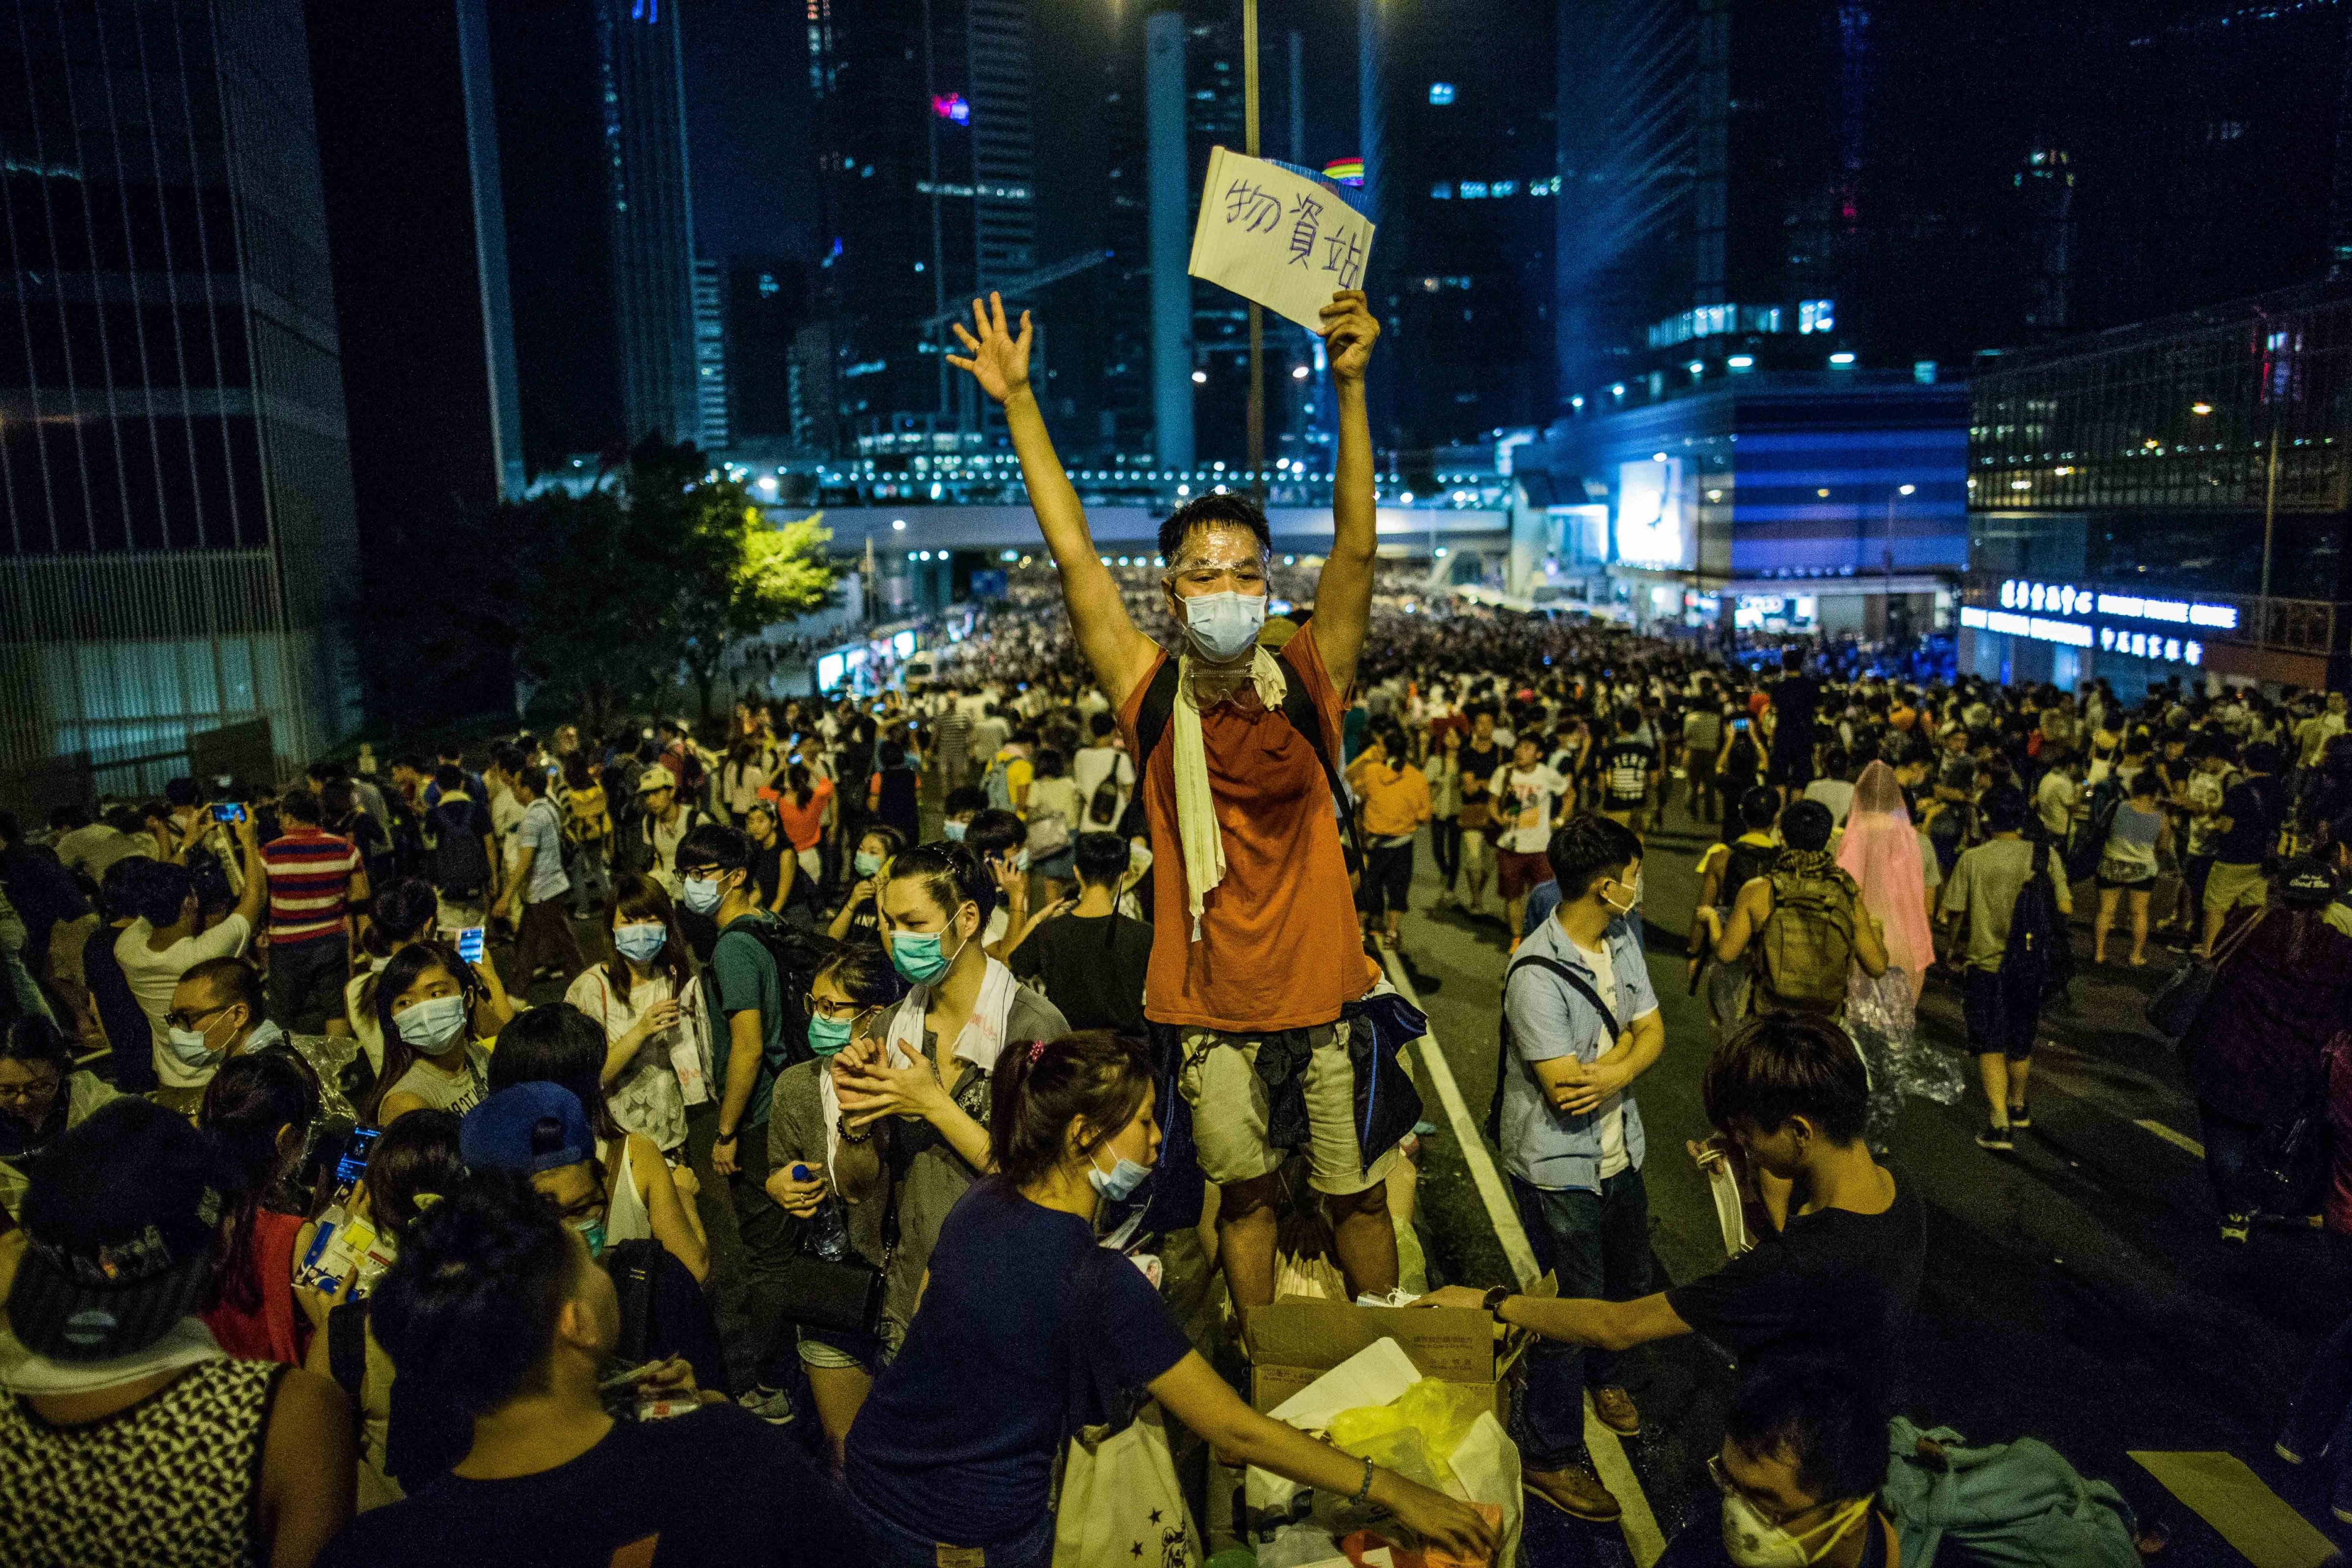 A man holds a sign that reads "Supplies" in Hong Kong on Sept. 28, 2014. The pro-democracy protesters occupy several city blocks surrounding the government headquarters, effectively blocking key roads linking Central to the rest of Hong Kong Island (Todd Darling—Polaris)